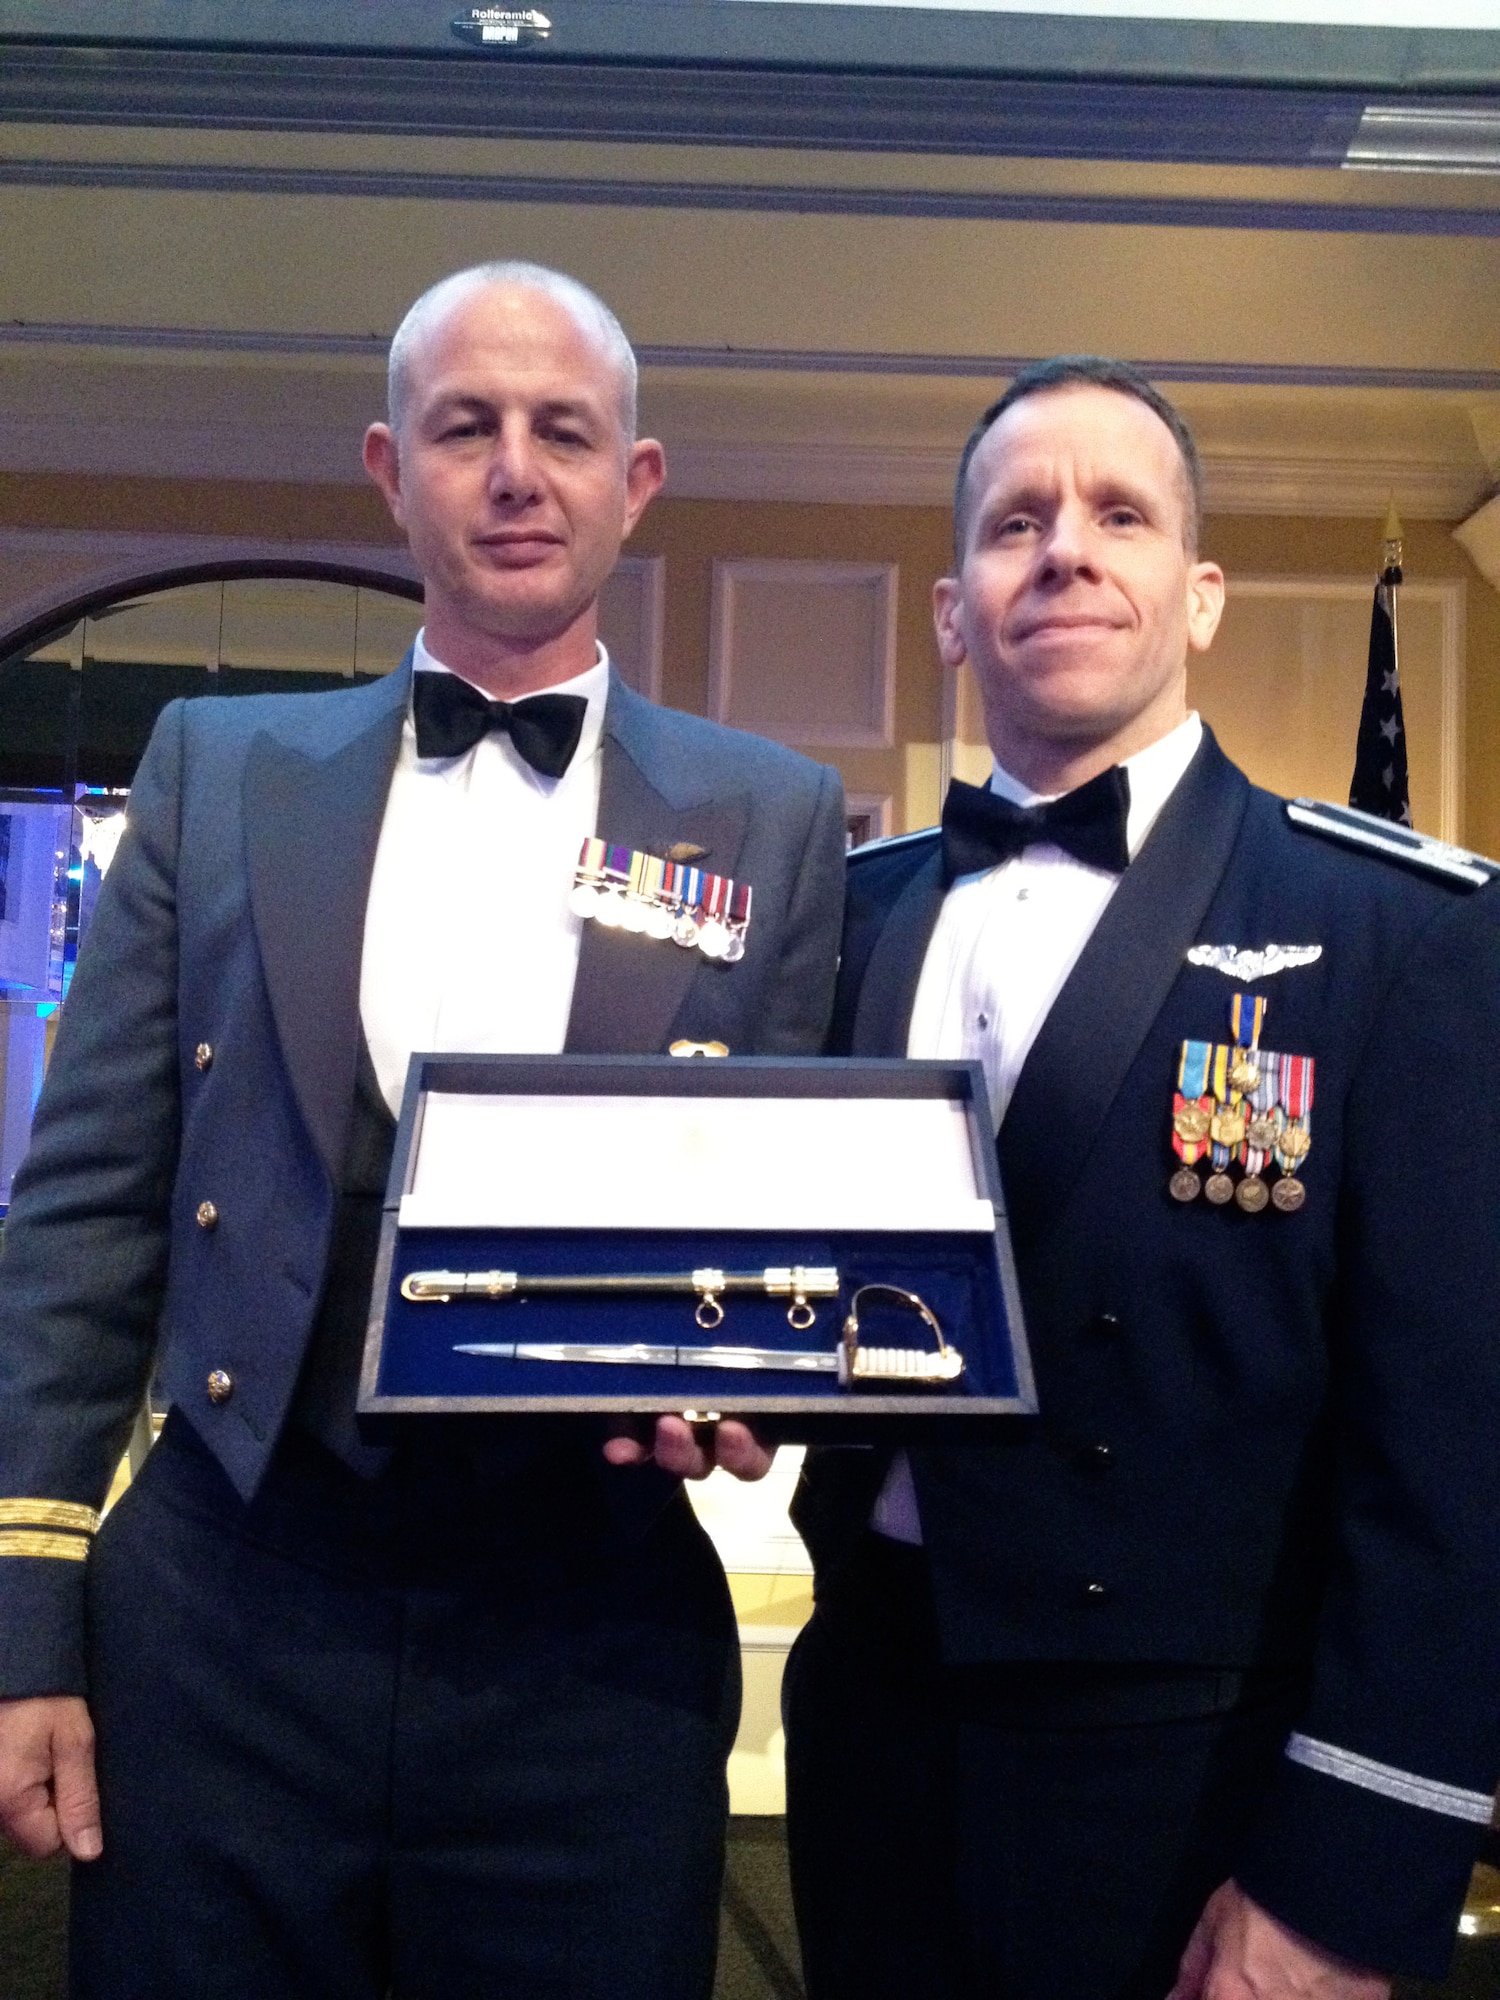 From left, Flt. Lt. Si Holden, a 16th Airborne Command and Control Squadron airborne  intelligence officer and instructor on the Joint Surveillance Target Attack Radar System, and Lt. Col. Paul Maykish, 16th ACCS commander pose with the 2012 Royal Air Force Sword of Honor following the 2012 Battle of Britain Gala Banquet in Washington D.C. Courtesy photo